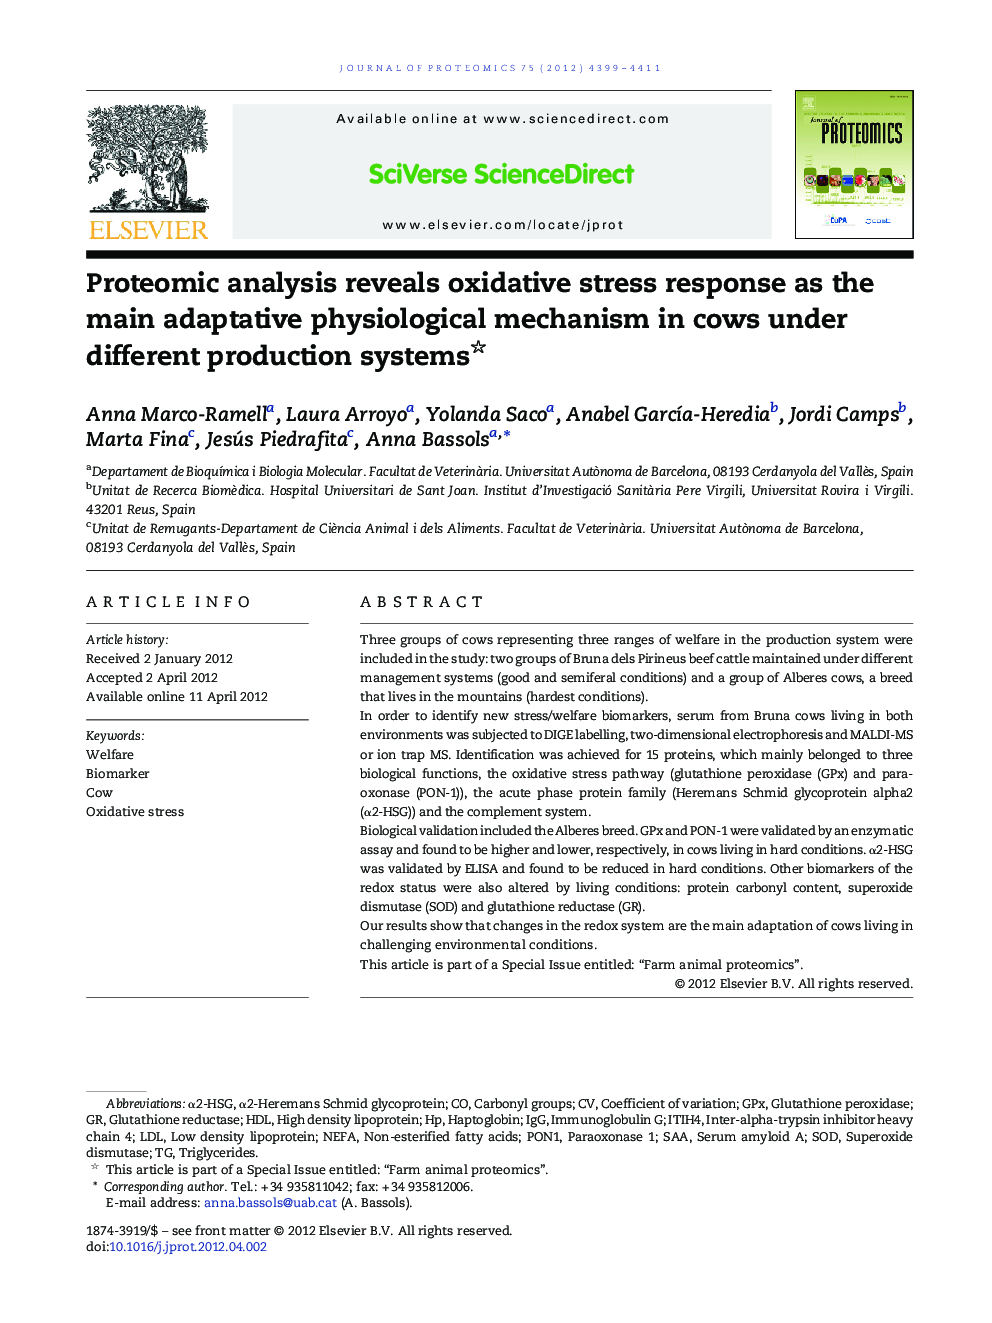 Proteomic analysis reveals oxidative stress response as the main adaptative physiological mechanism in cows under different production systems